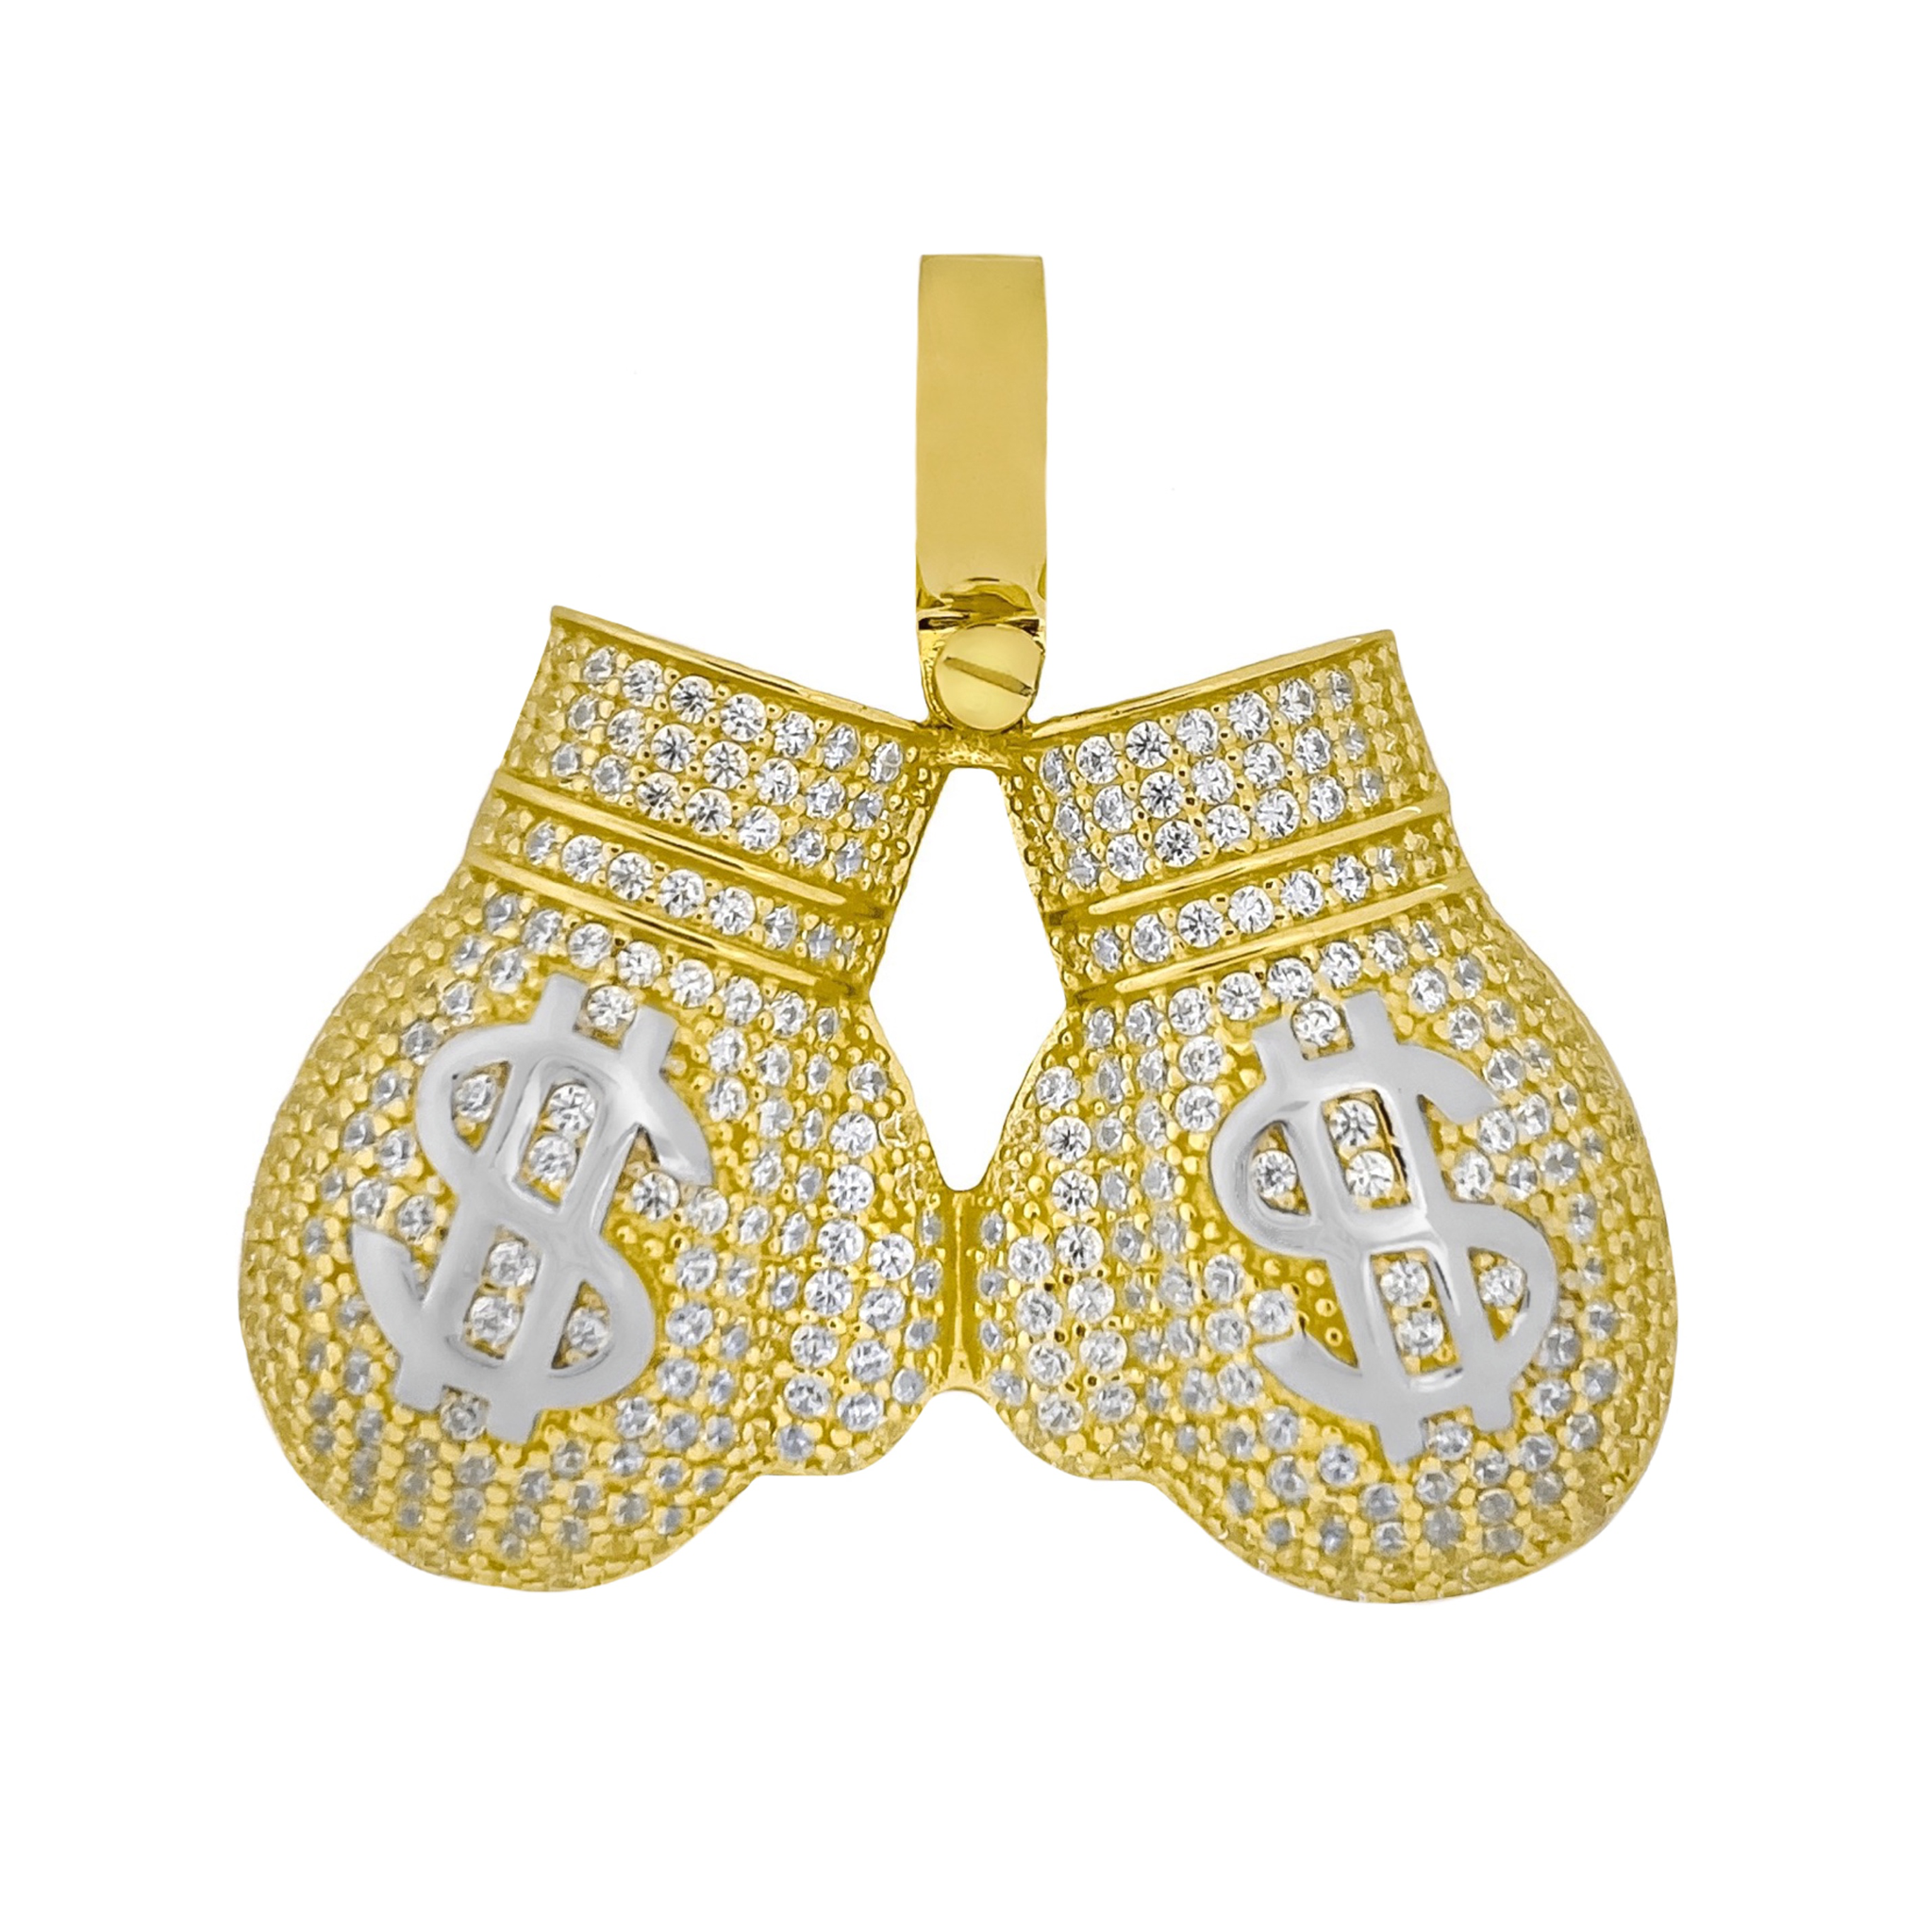 10K YELLOW GOLD PAVE DOLLAR SIGN BOXING GLOVES PENDANT